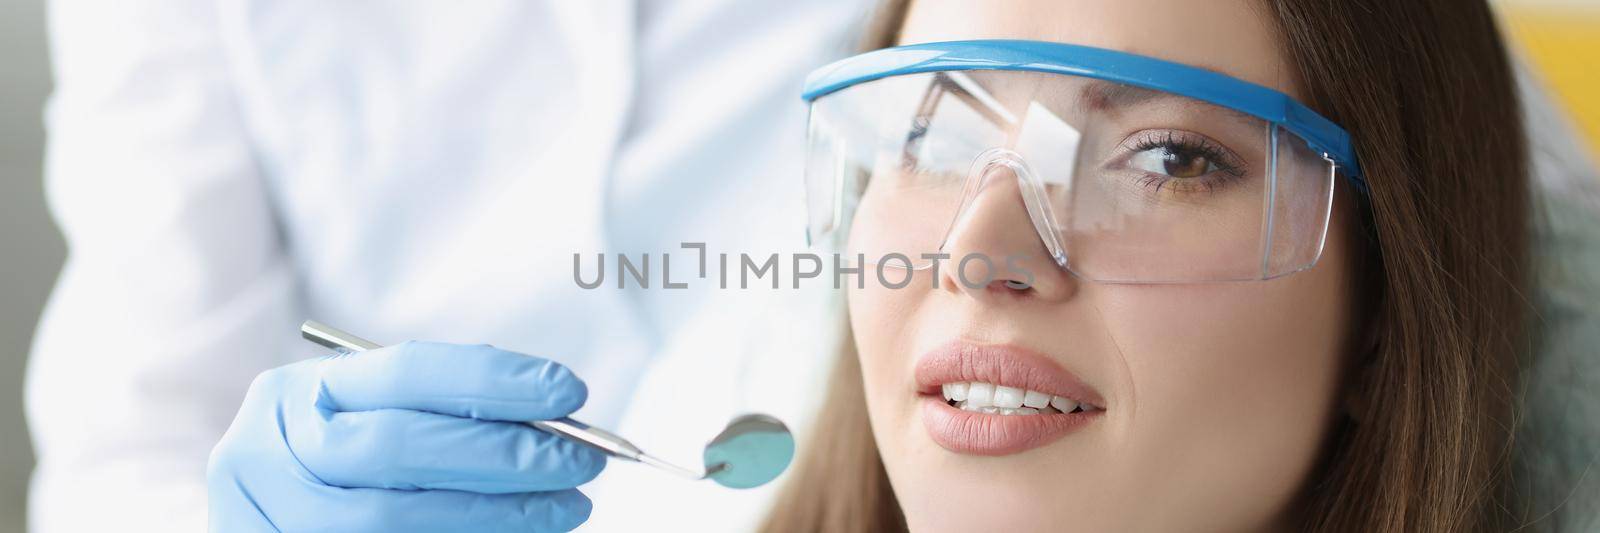 Portrait of pretty woman sitting at dentist chair. Stomatologist holding dental instruments. Dental care, stomatology clinic and healthy teeth concept